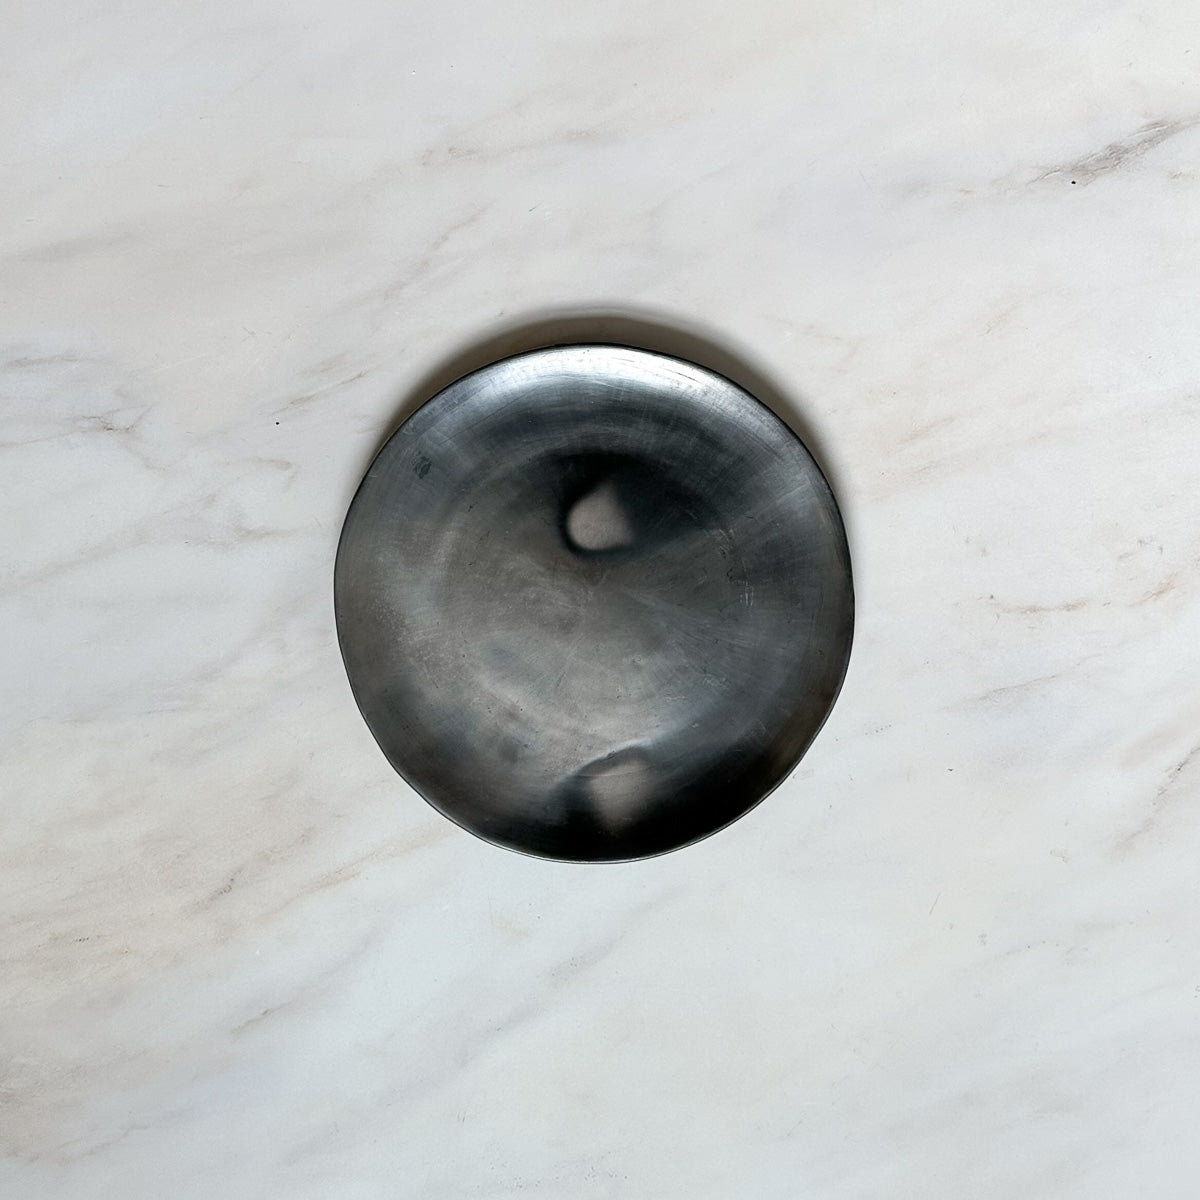 A Oaxaca silvery black clay dinner plate on a marble counter.